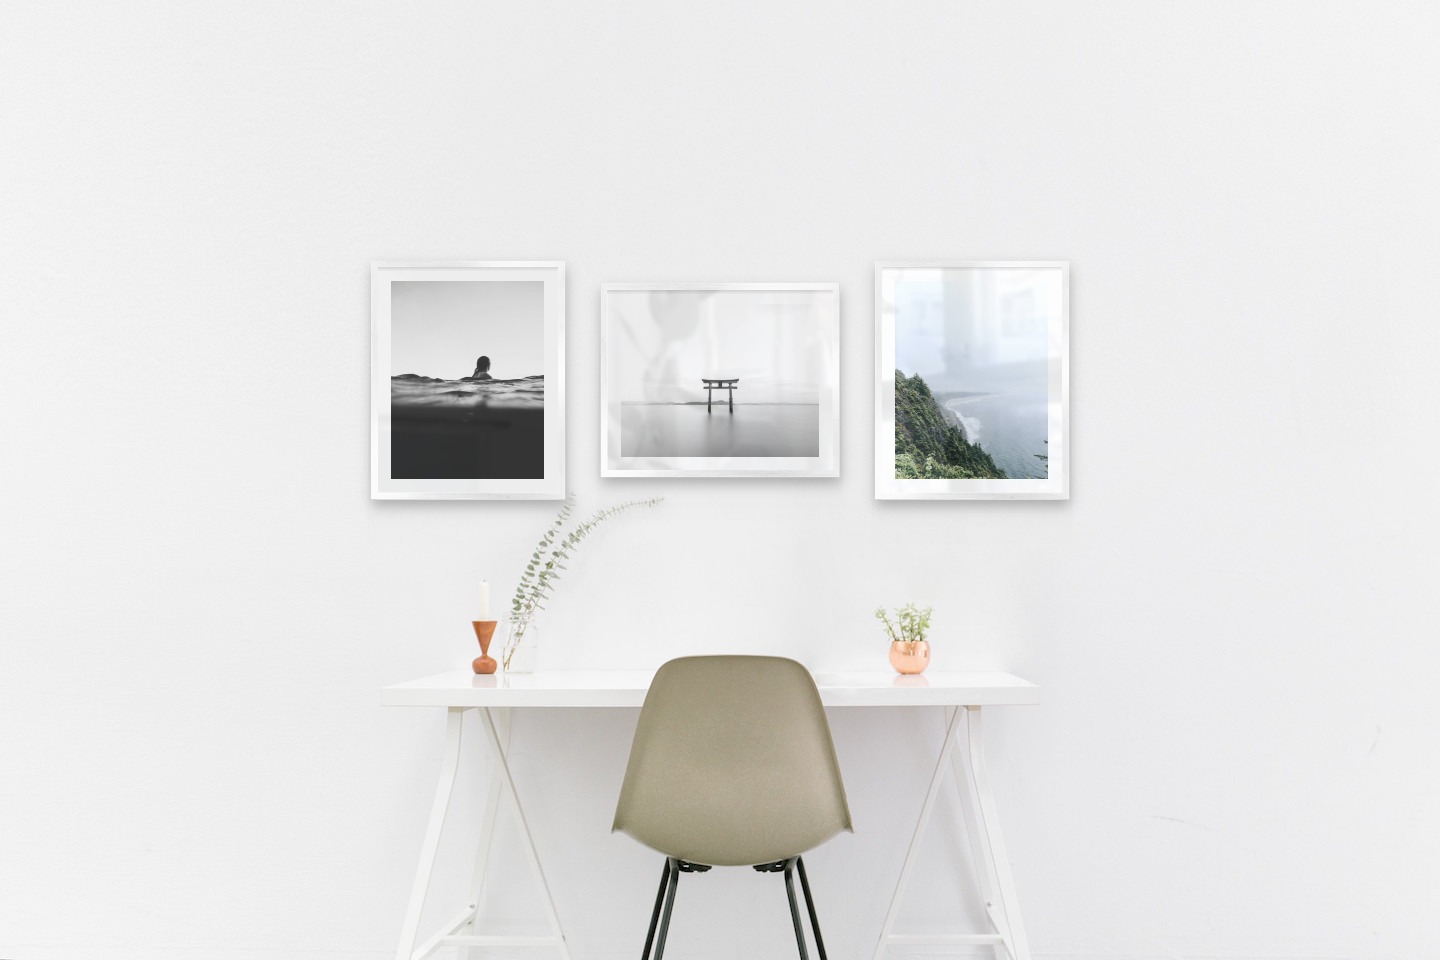 Gallery wall with picture frames in silver in sizes 40x50 with prints "Person in the water", "Pillars in the water" and "Rocks facing the water"